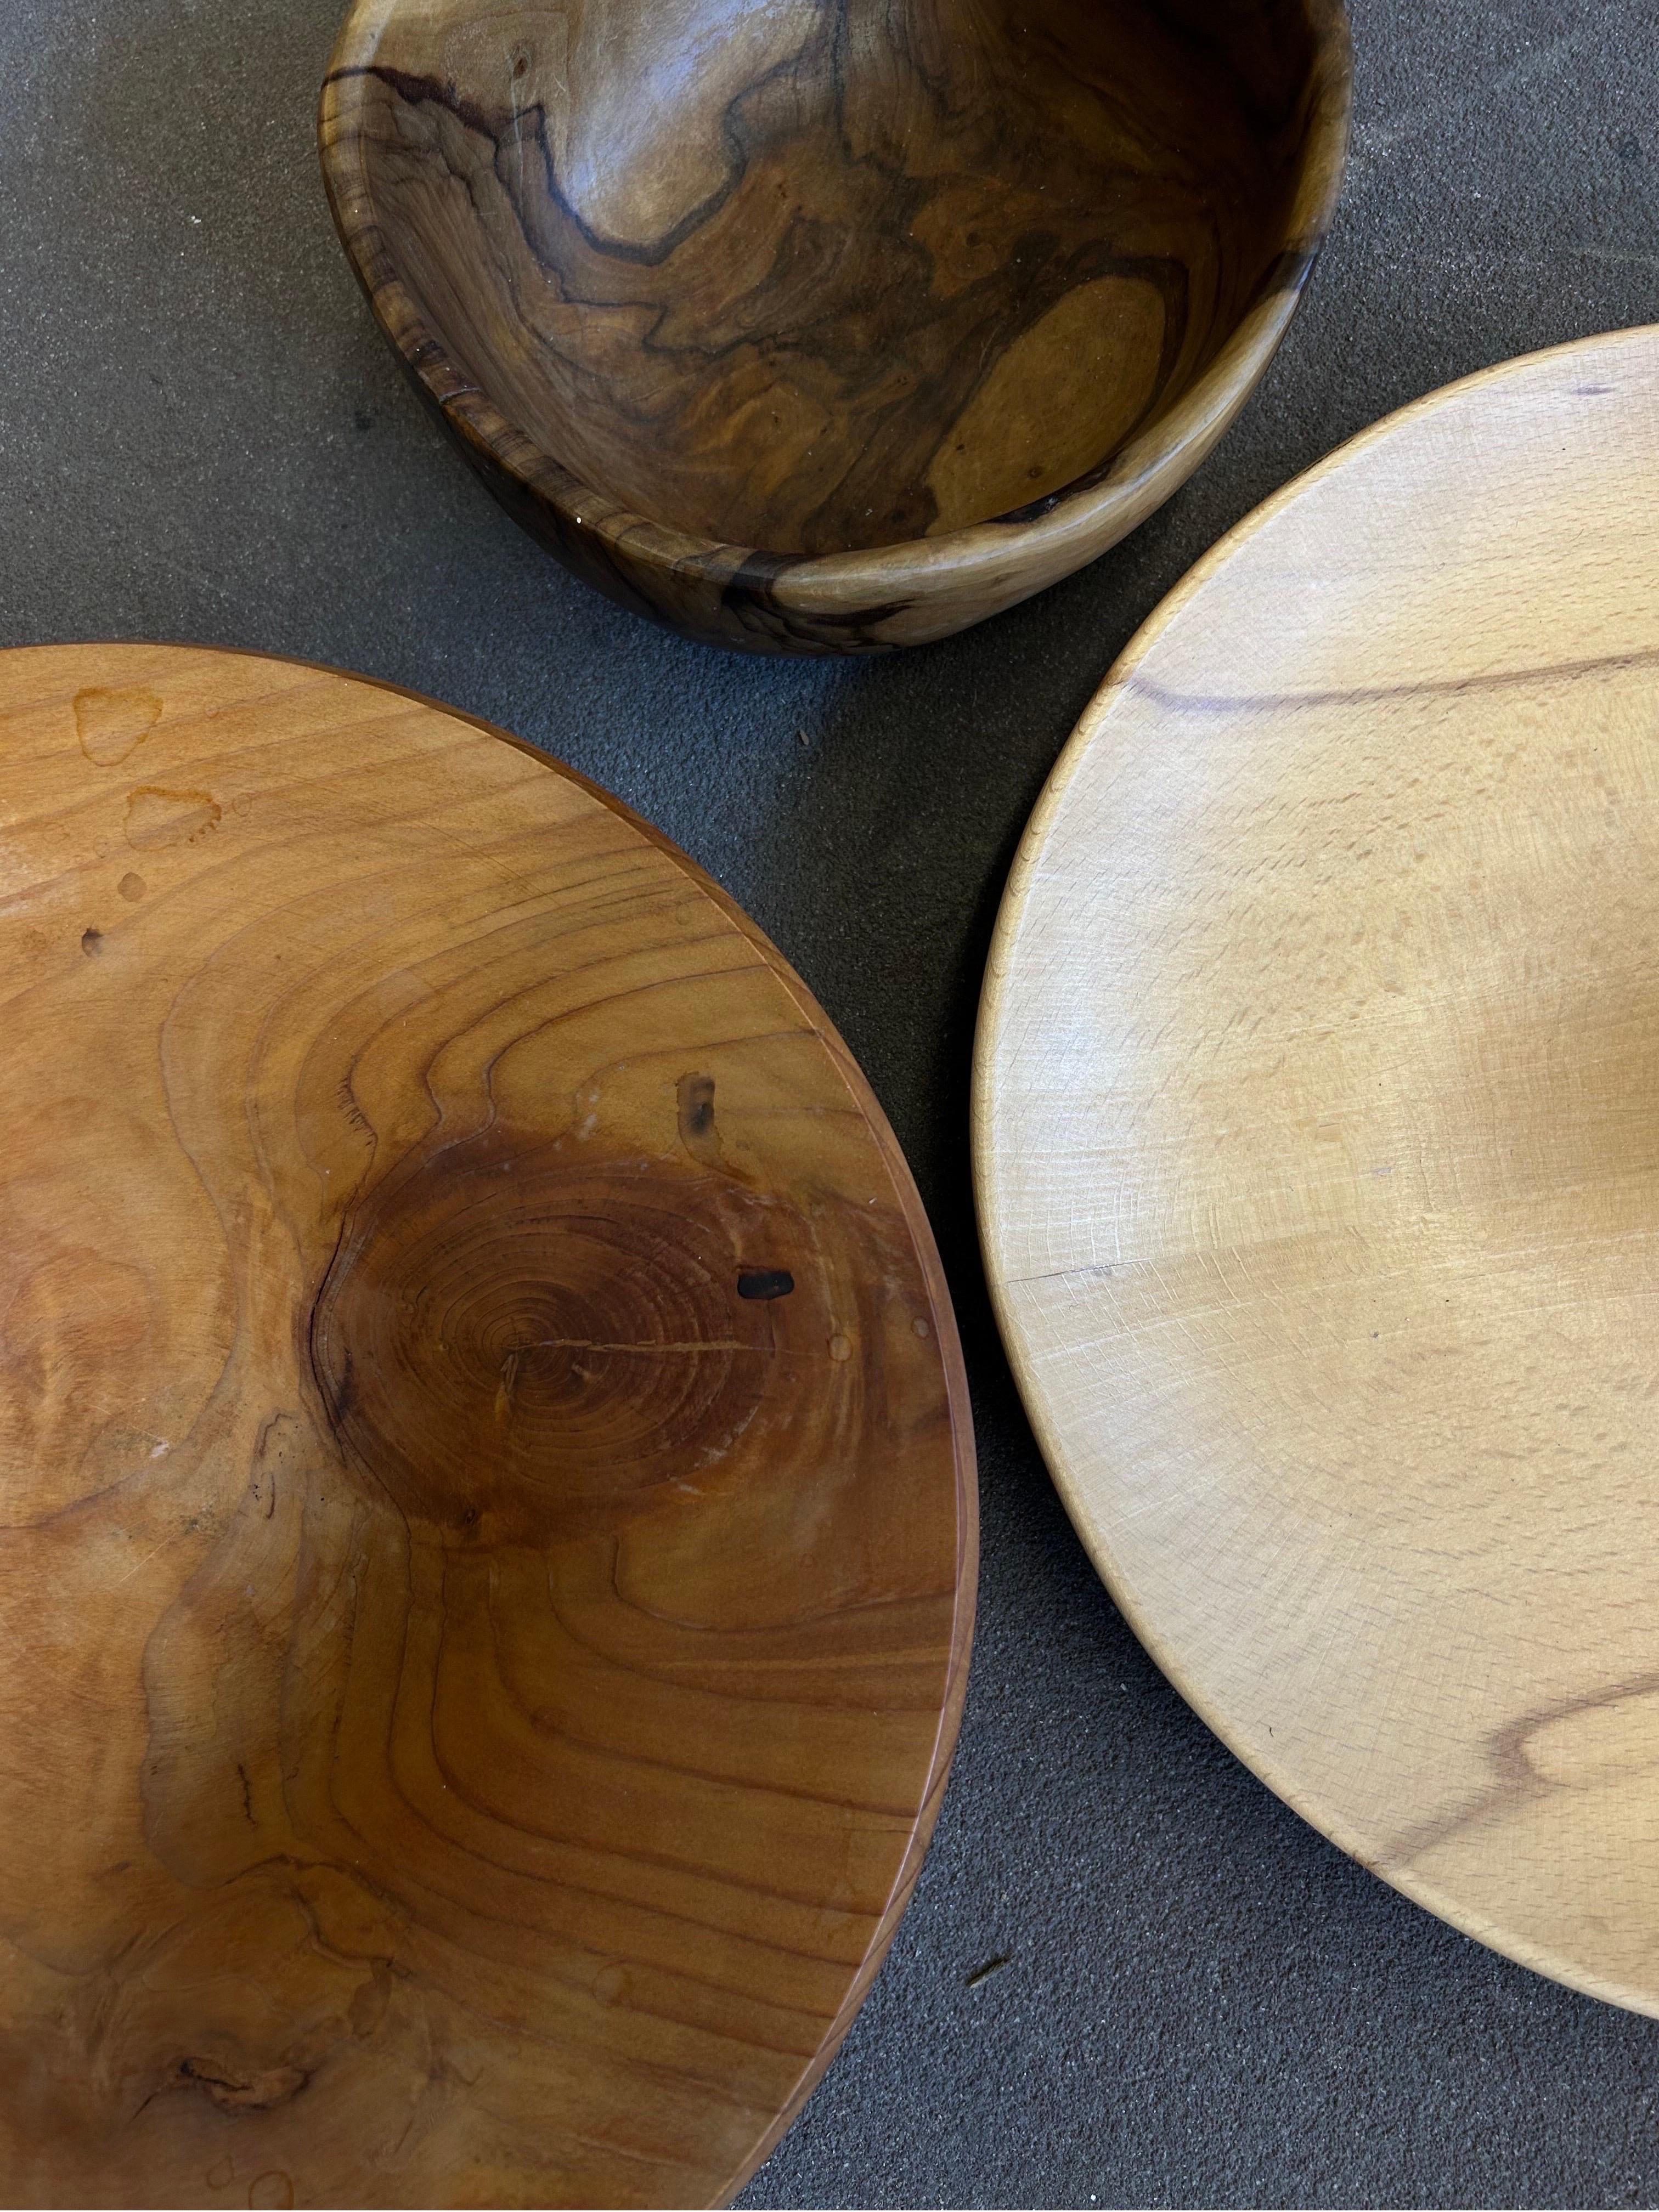 Collection of Scandinavian wooden bowls and dishes made in beechwood and pine and nut wood.

The bowls are the perfect pieces as either decorative objects in a interior or as serving trays or bowls.

The collection of bowls all have a beautiful